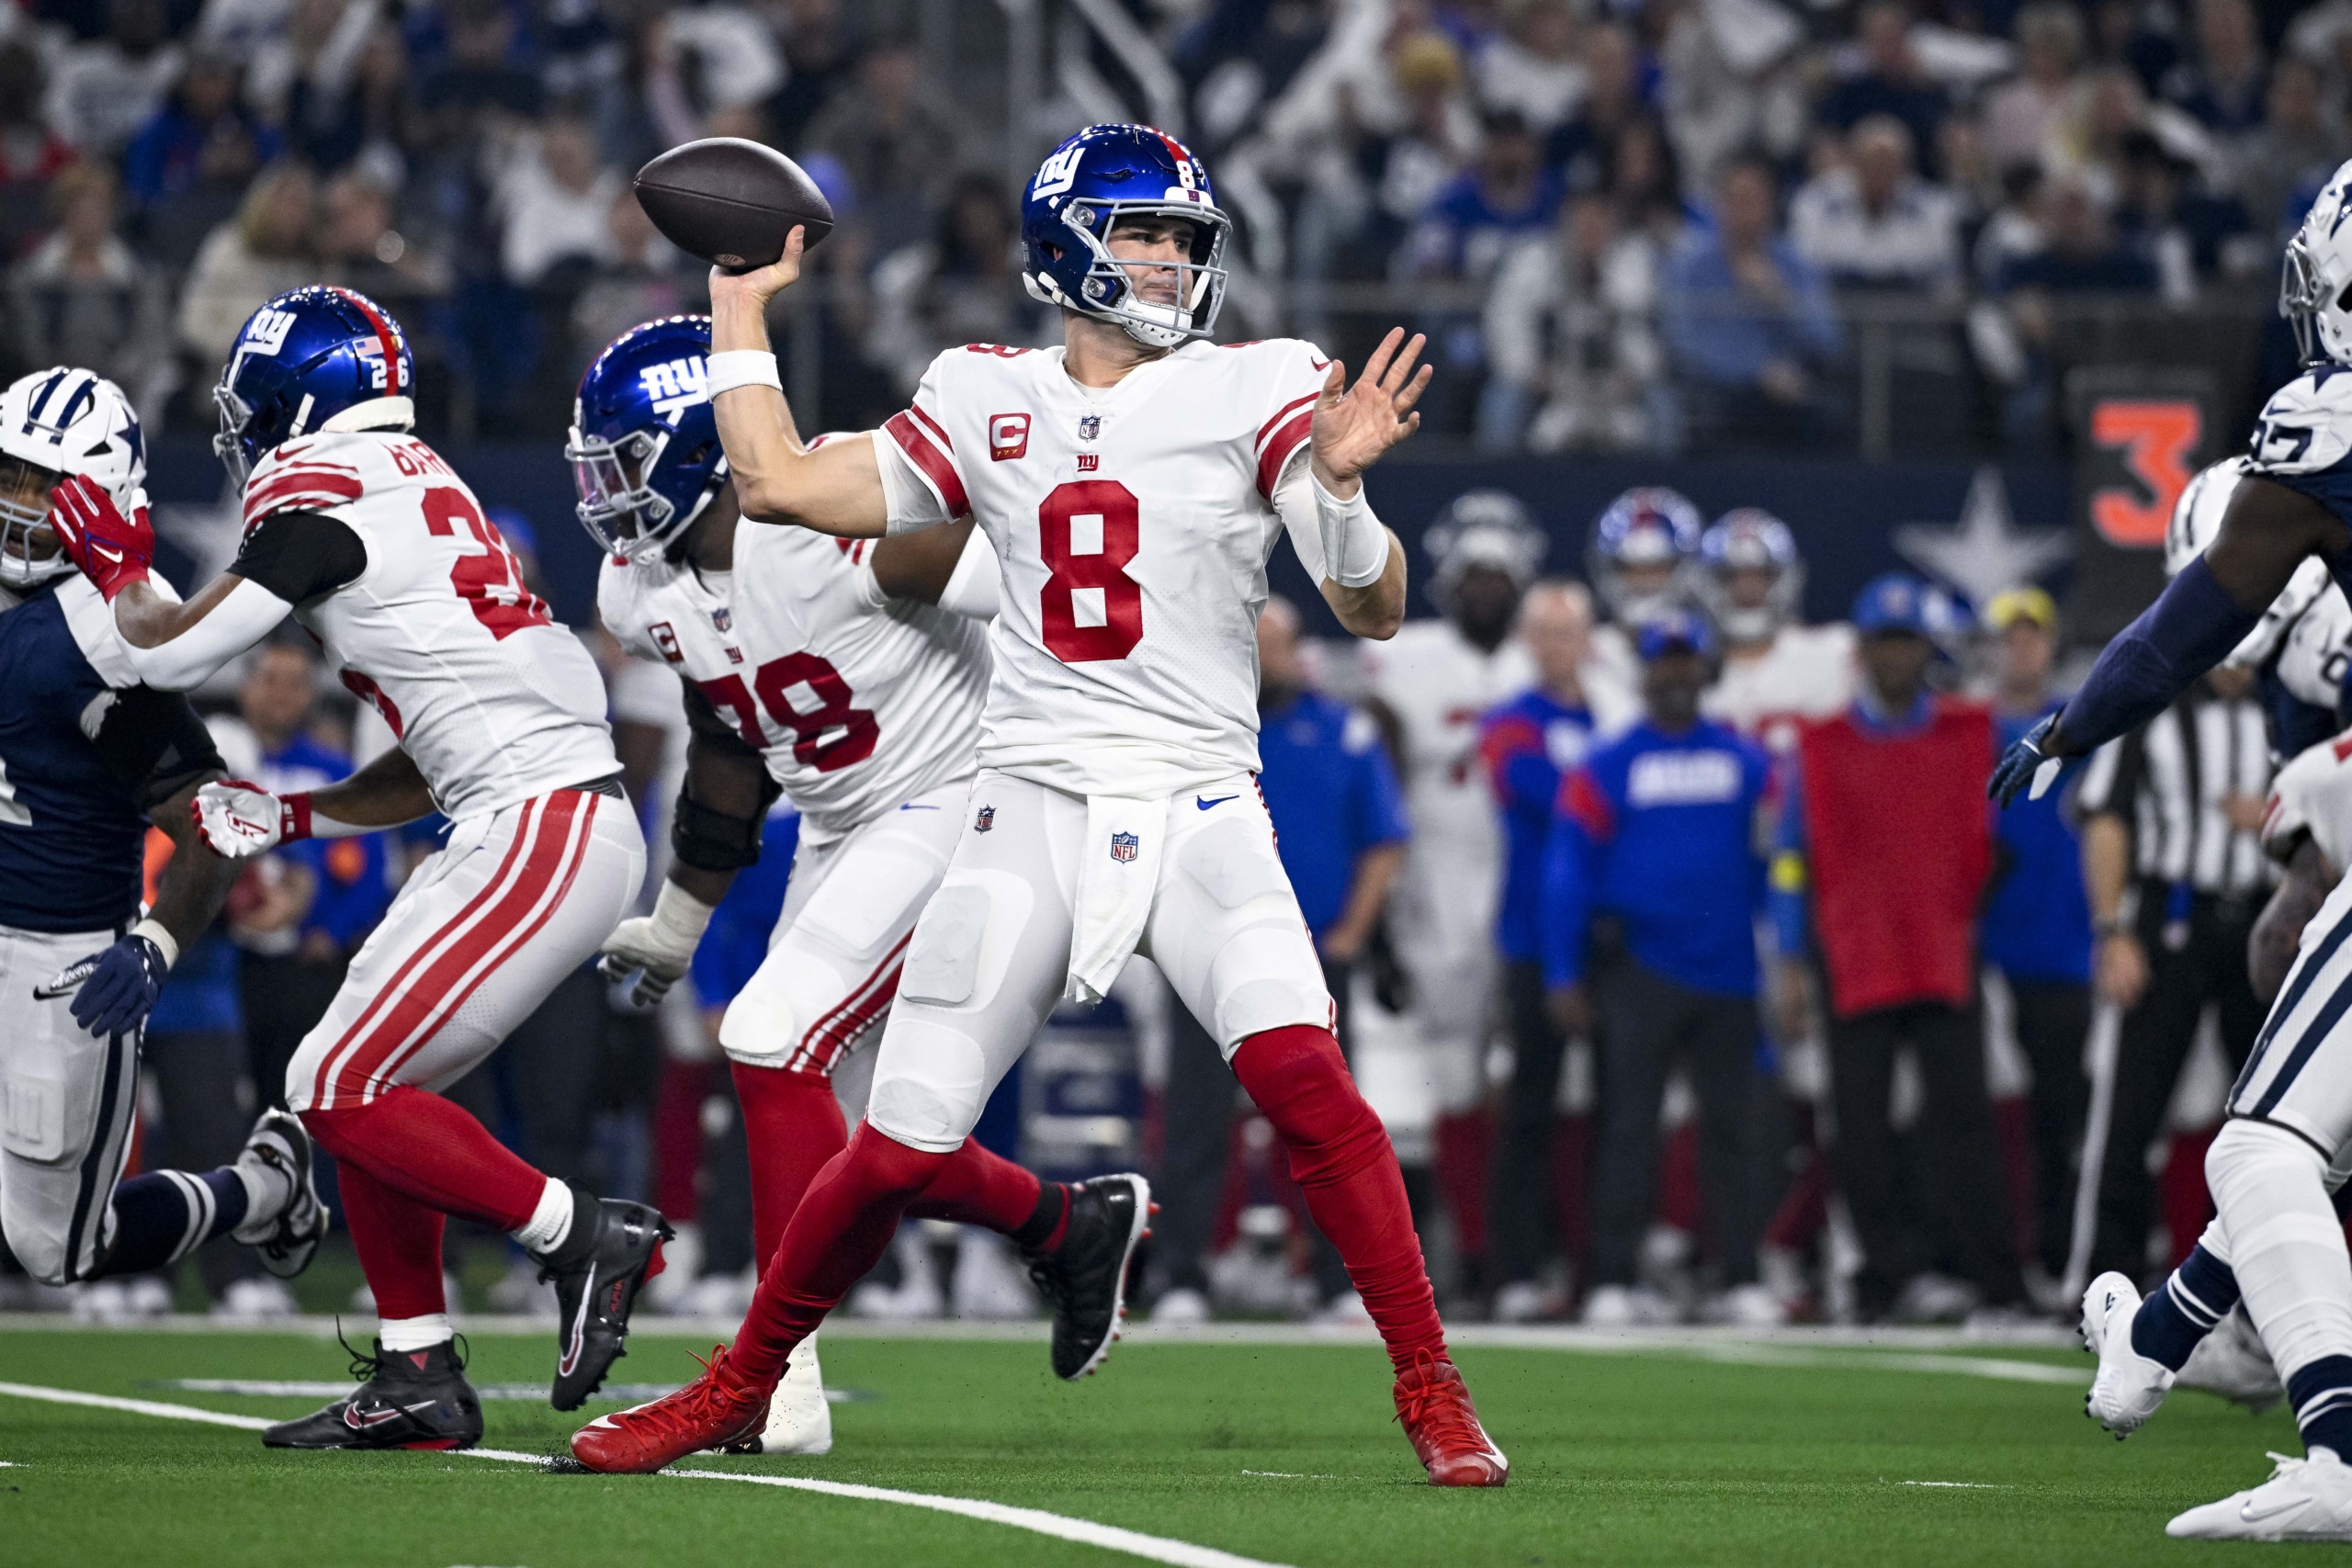 New York Giants schedule: Divisional Round battle vs. Eagles next